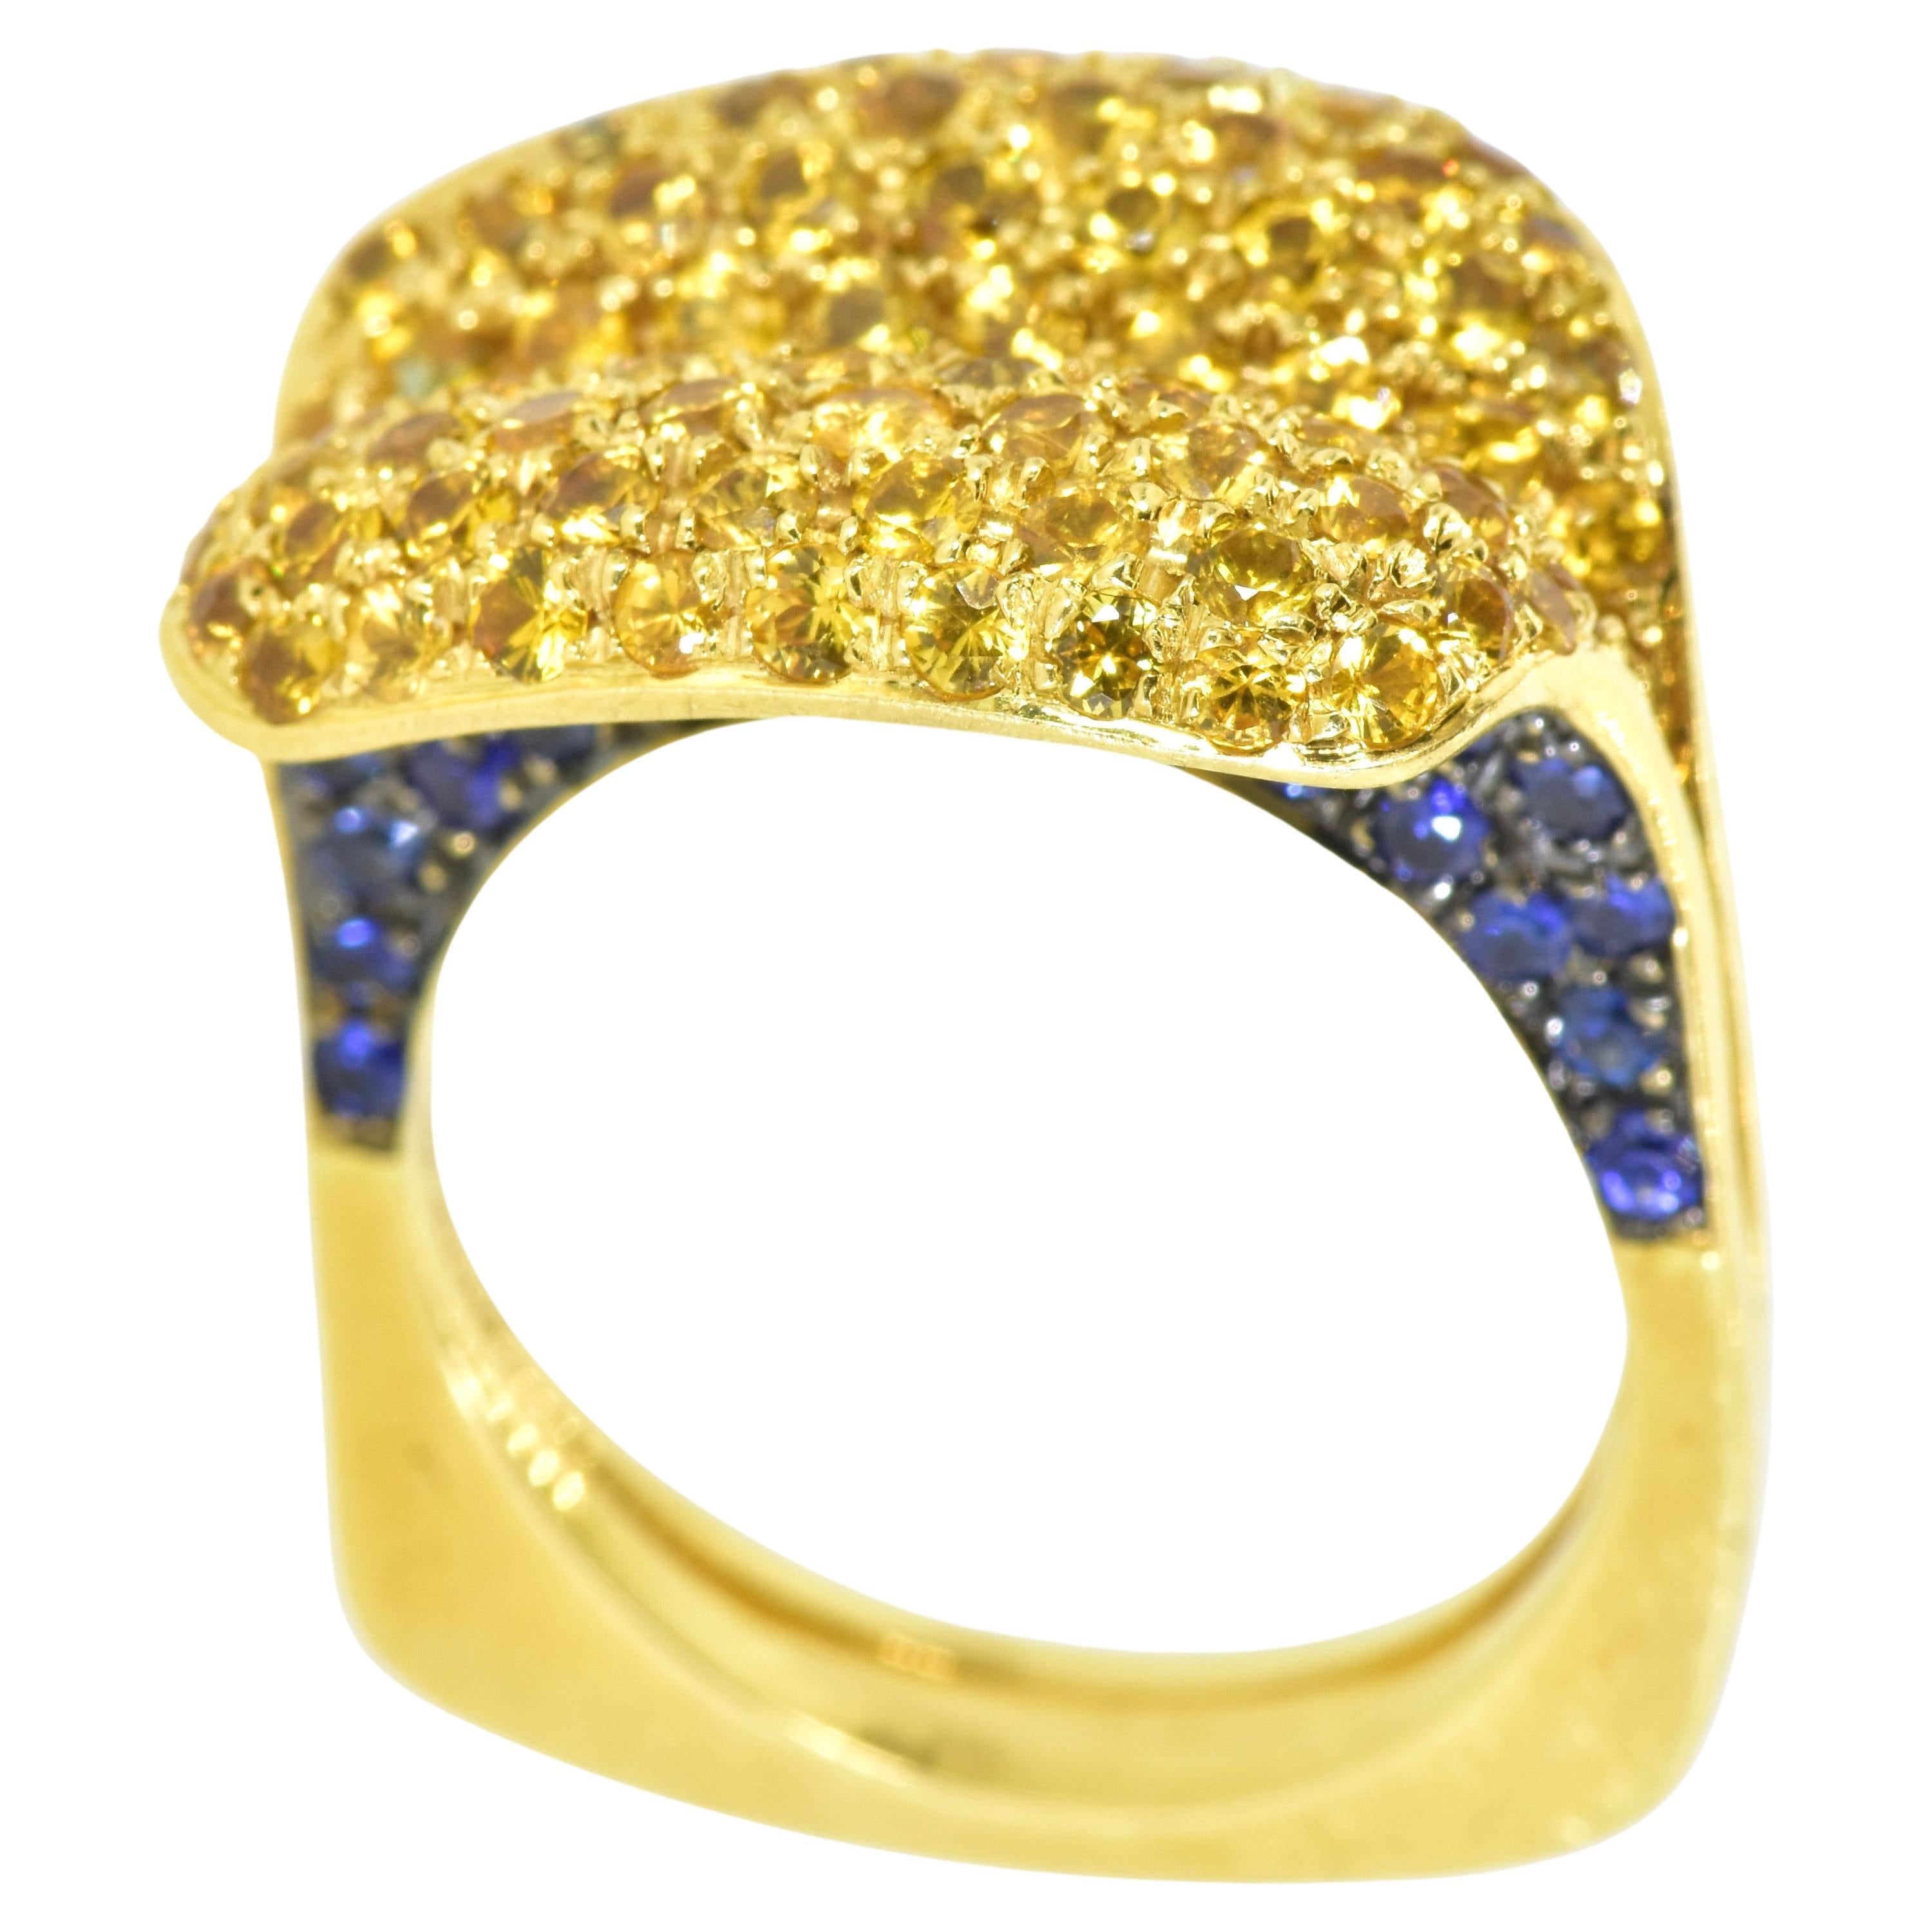 Yellow and blue sapphires set in 18K yellow gold in a very inventive ring by the jewelry designer Salavetti - known for their use of fine materials. The pave set natural golden (yellow) sapphires are a bright pleasing daisy yellow.  The  natural